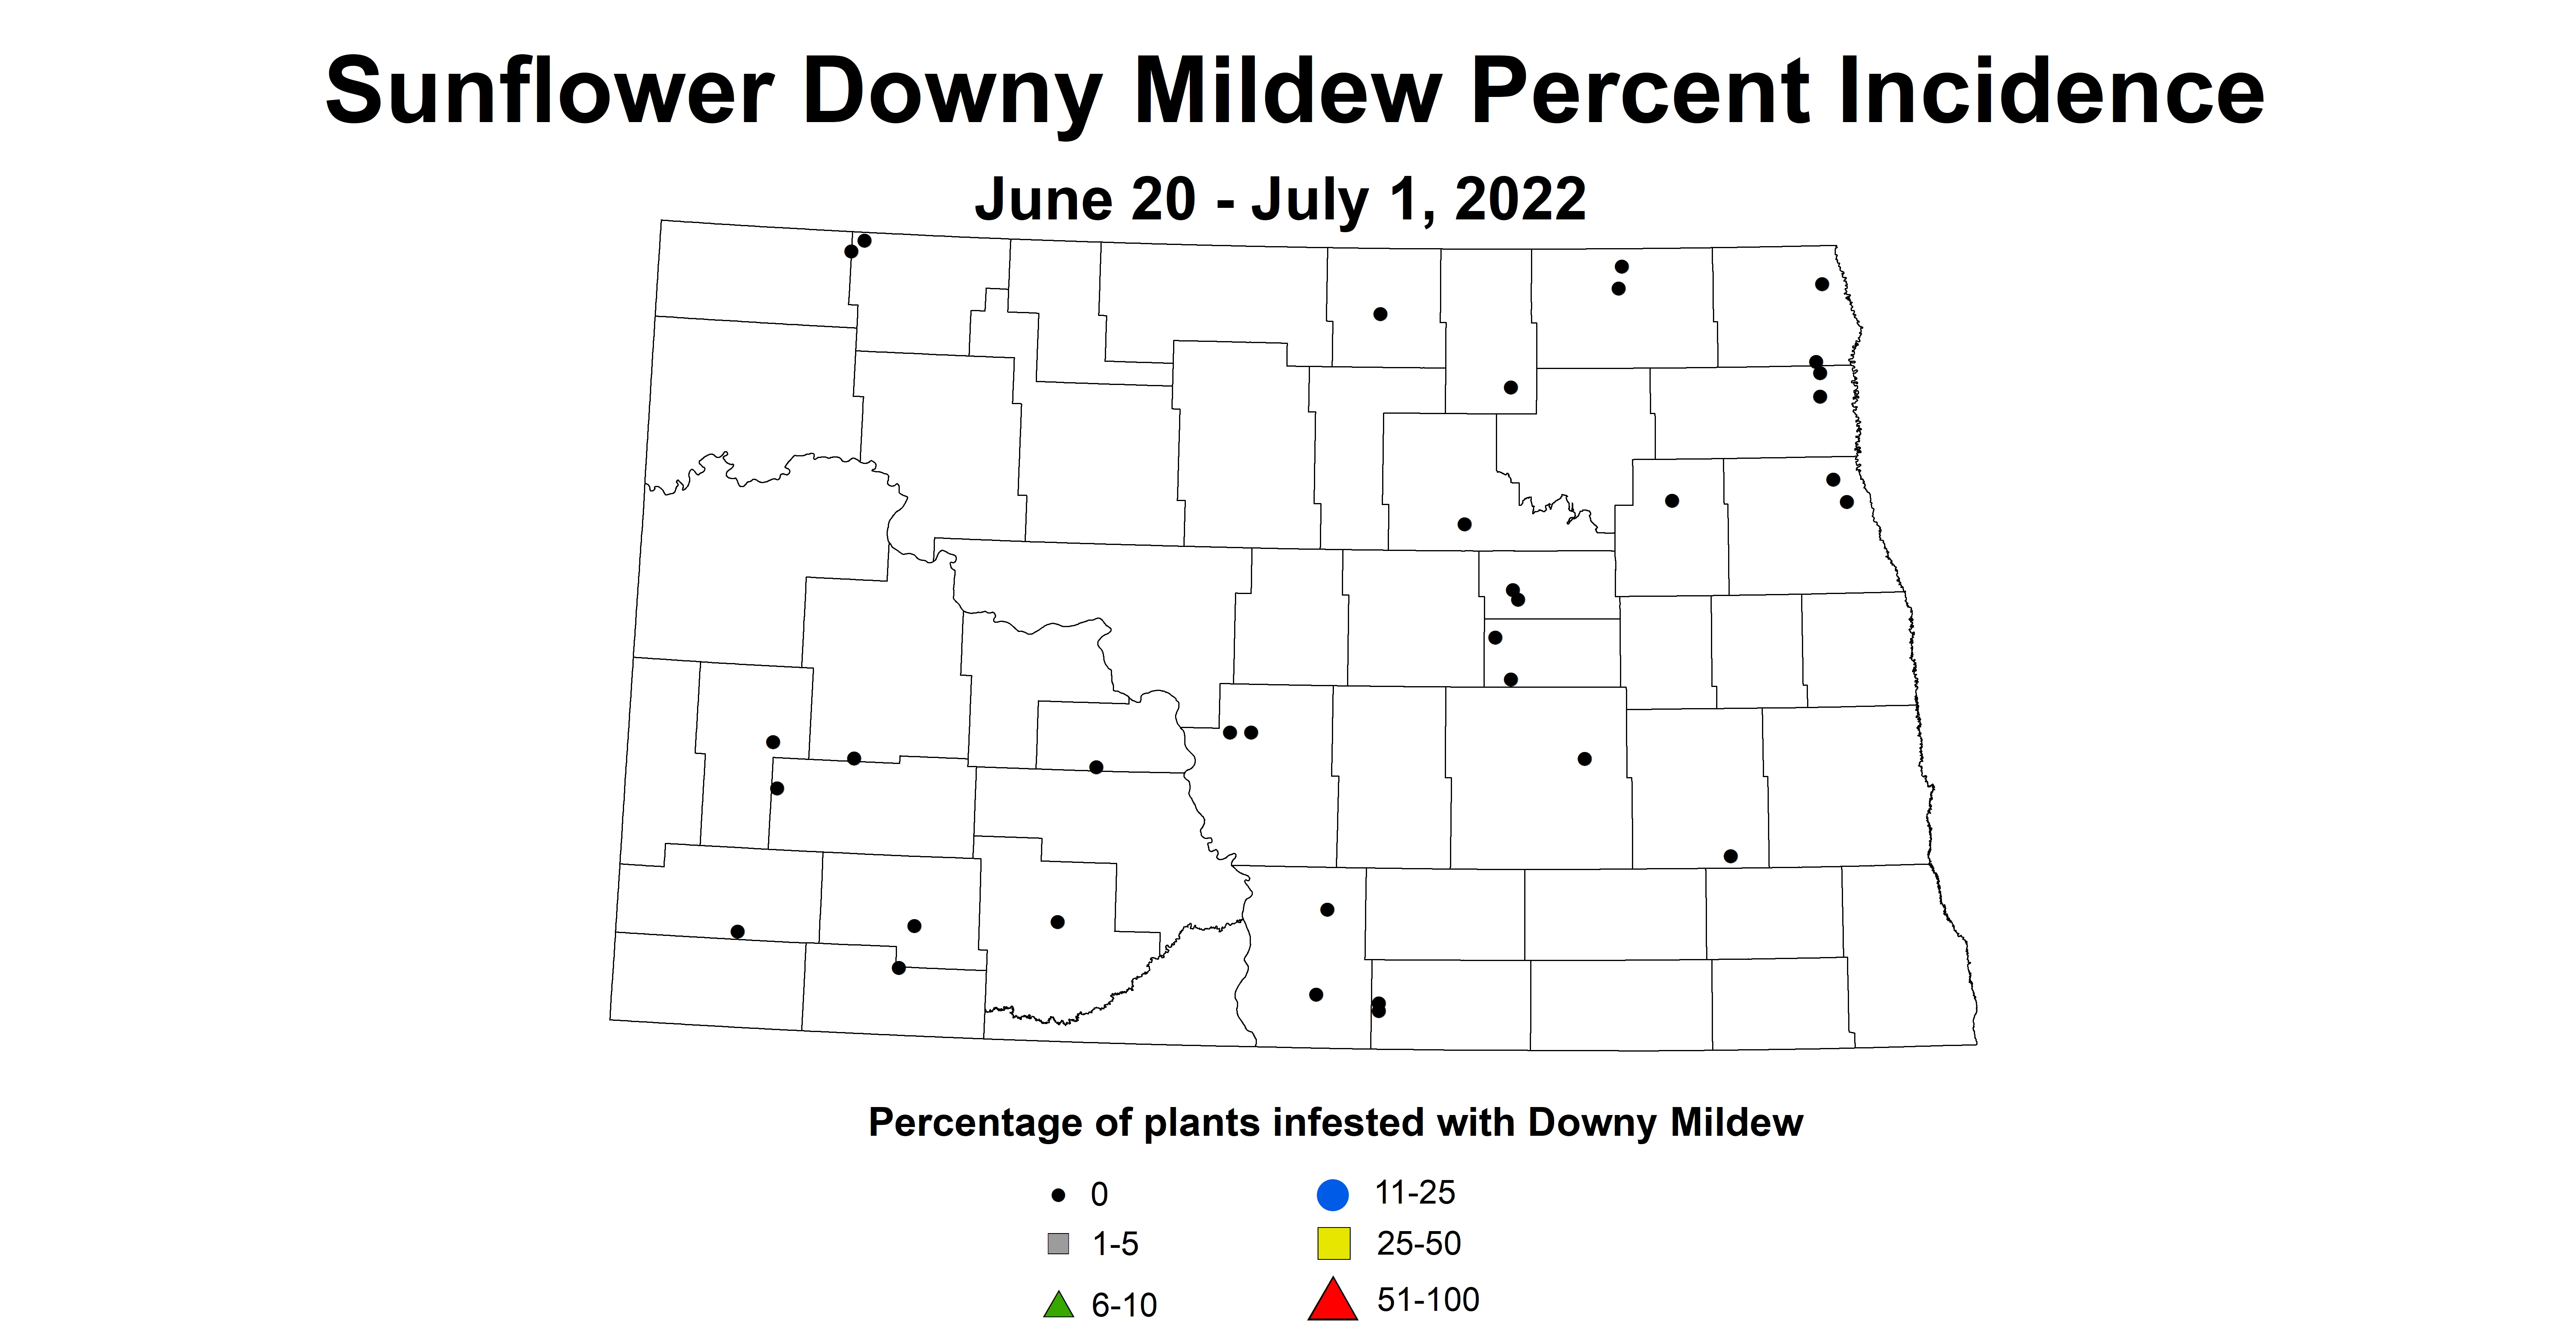 ND IPM map of sunflower downy mildew incidence June 20 to July 1 2022